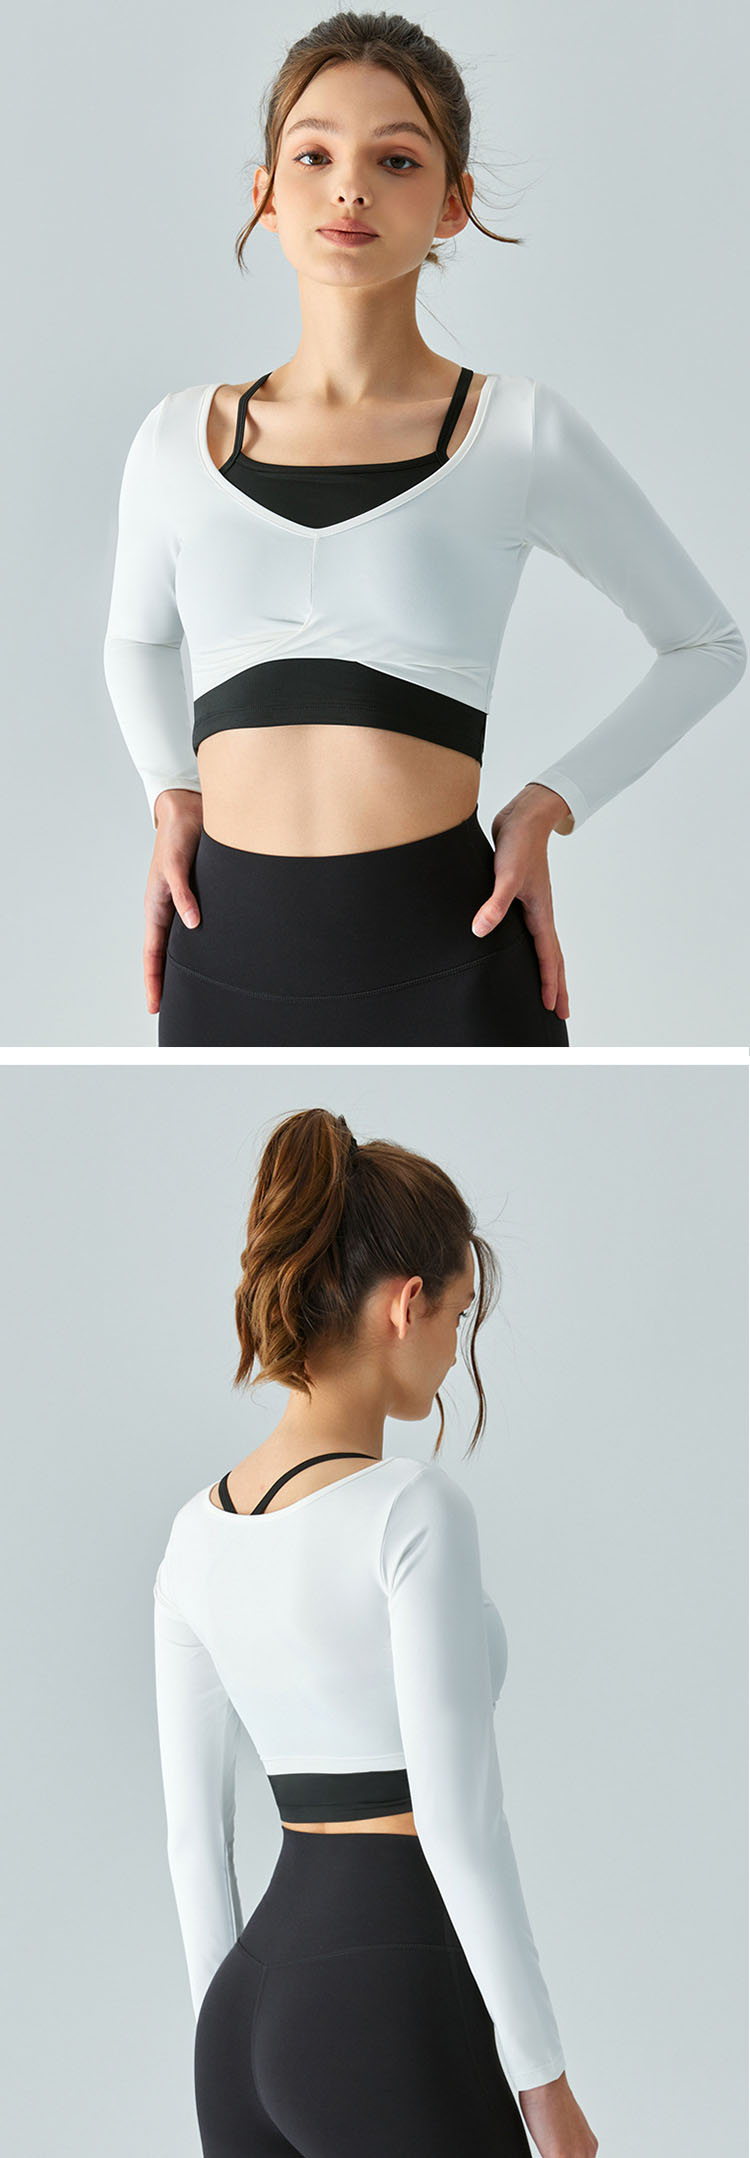 Introducing our new crop top gym shirts - the perfect combination of comfort